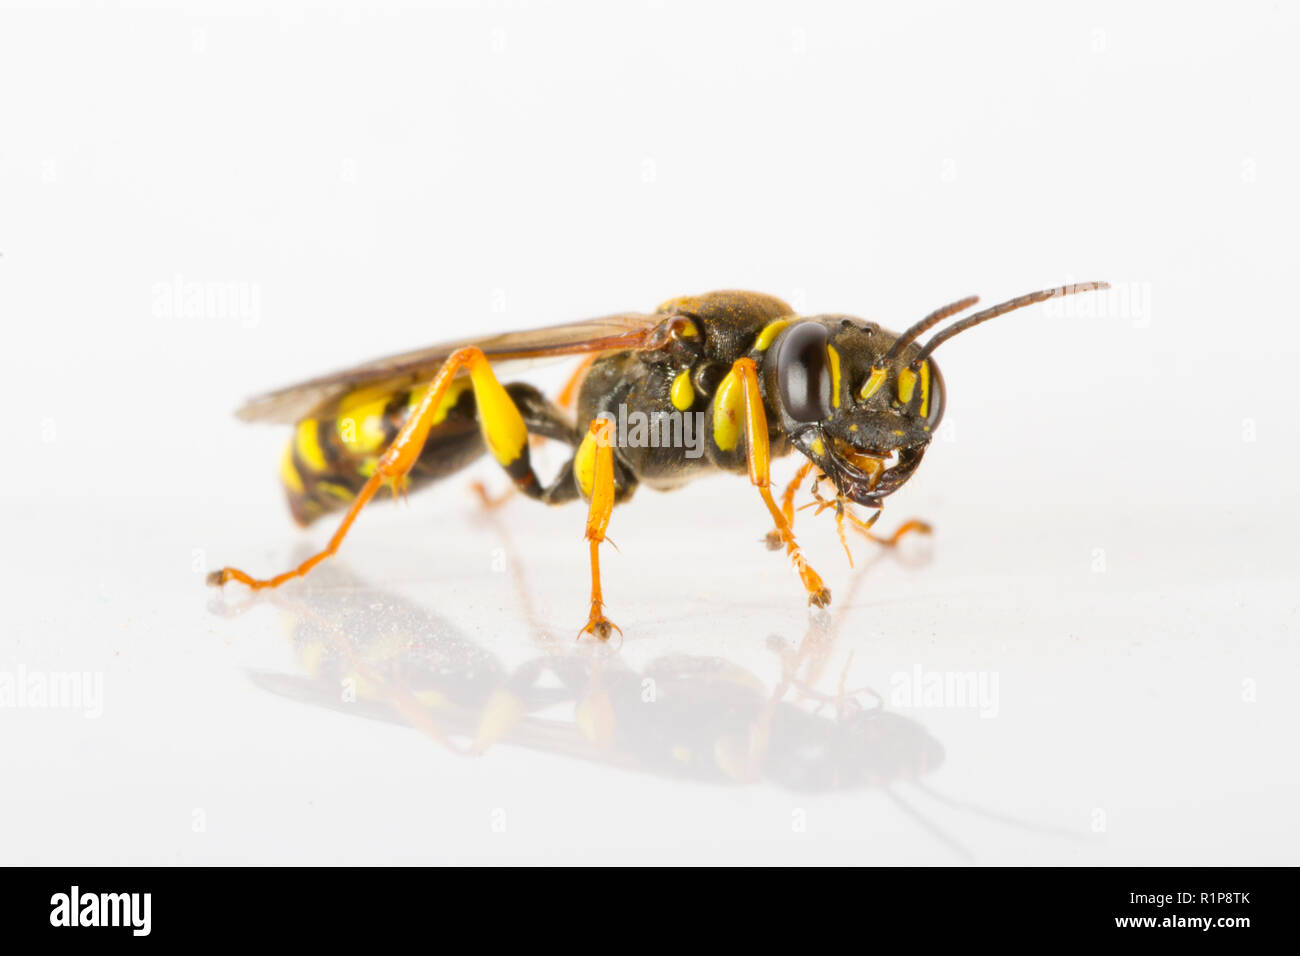 Field Digger Wasp (Mellinus arvensis) adult female photographed against a white background. Powys, Wales. July. Stock Photo